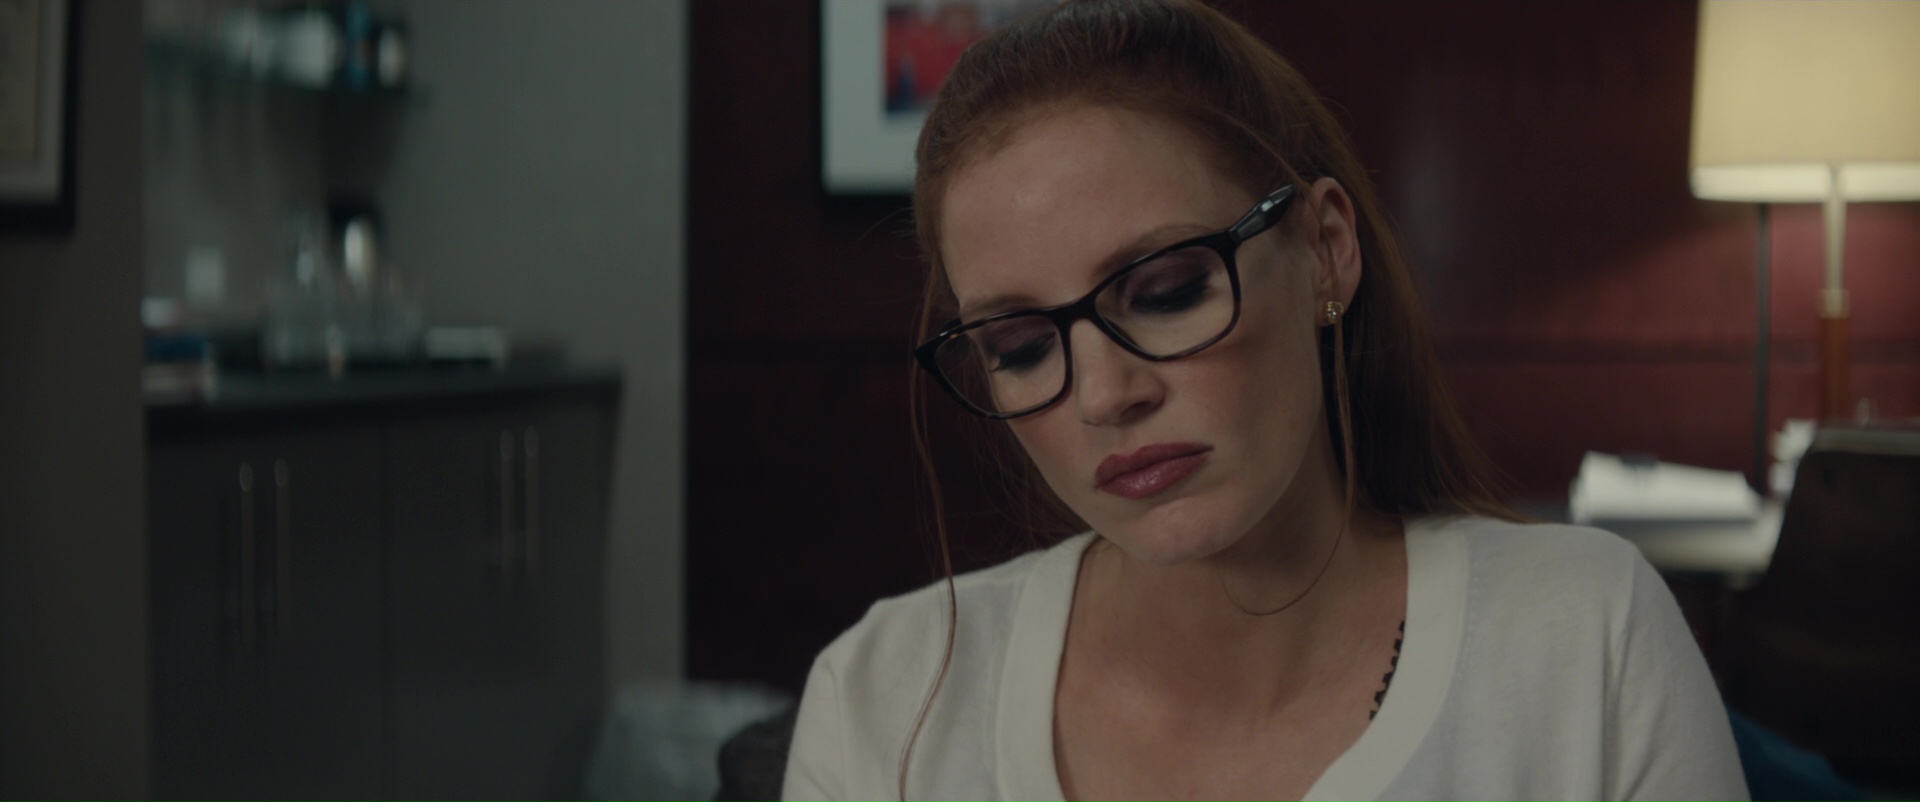 Prada Square Plastic Eyeglasses Worn by Jessica Chastain in Molly’s Game (2017) Movie